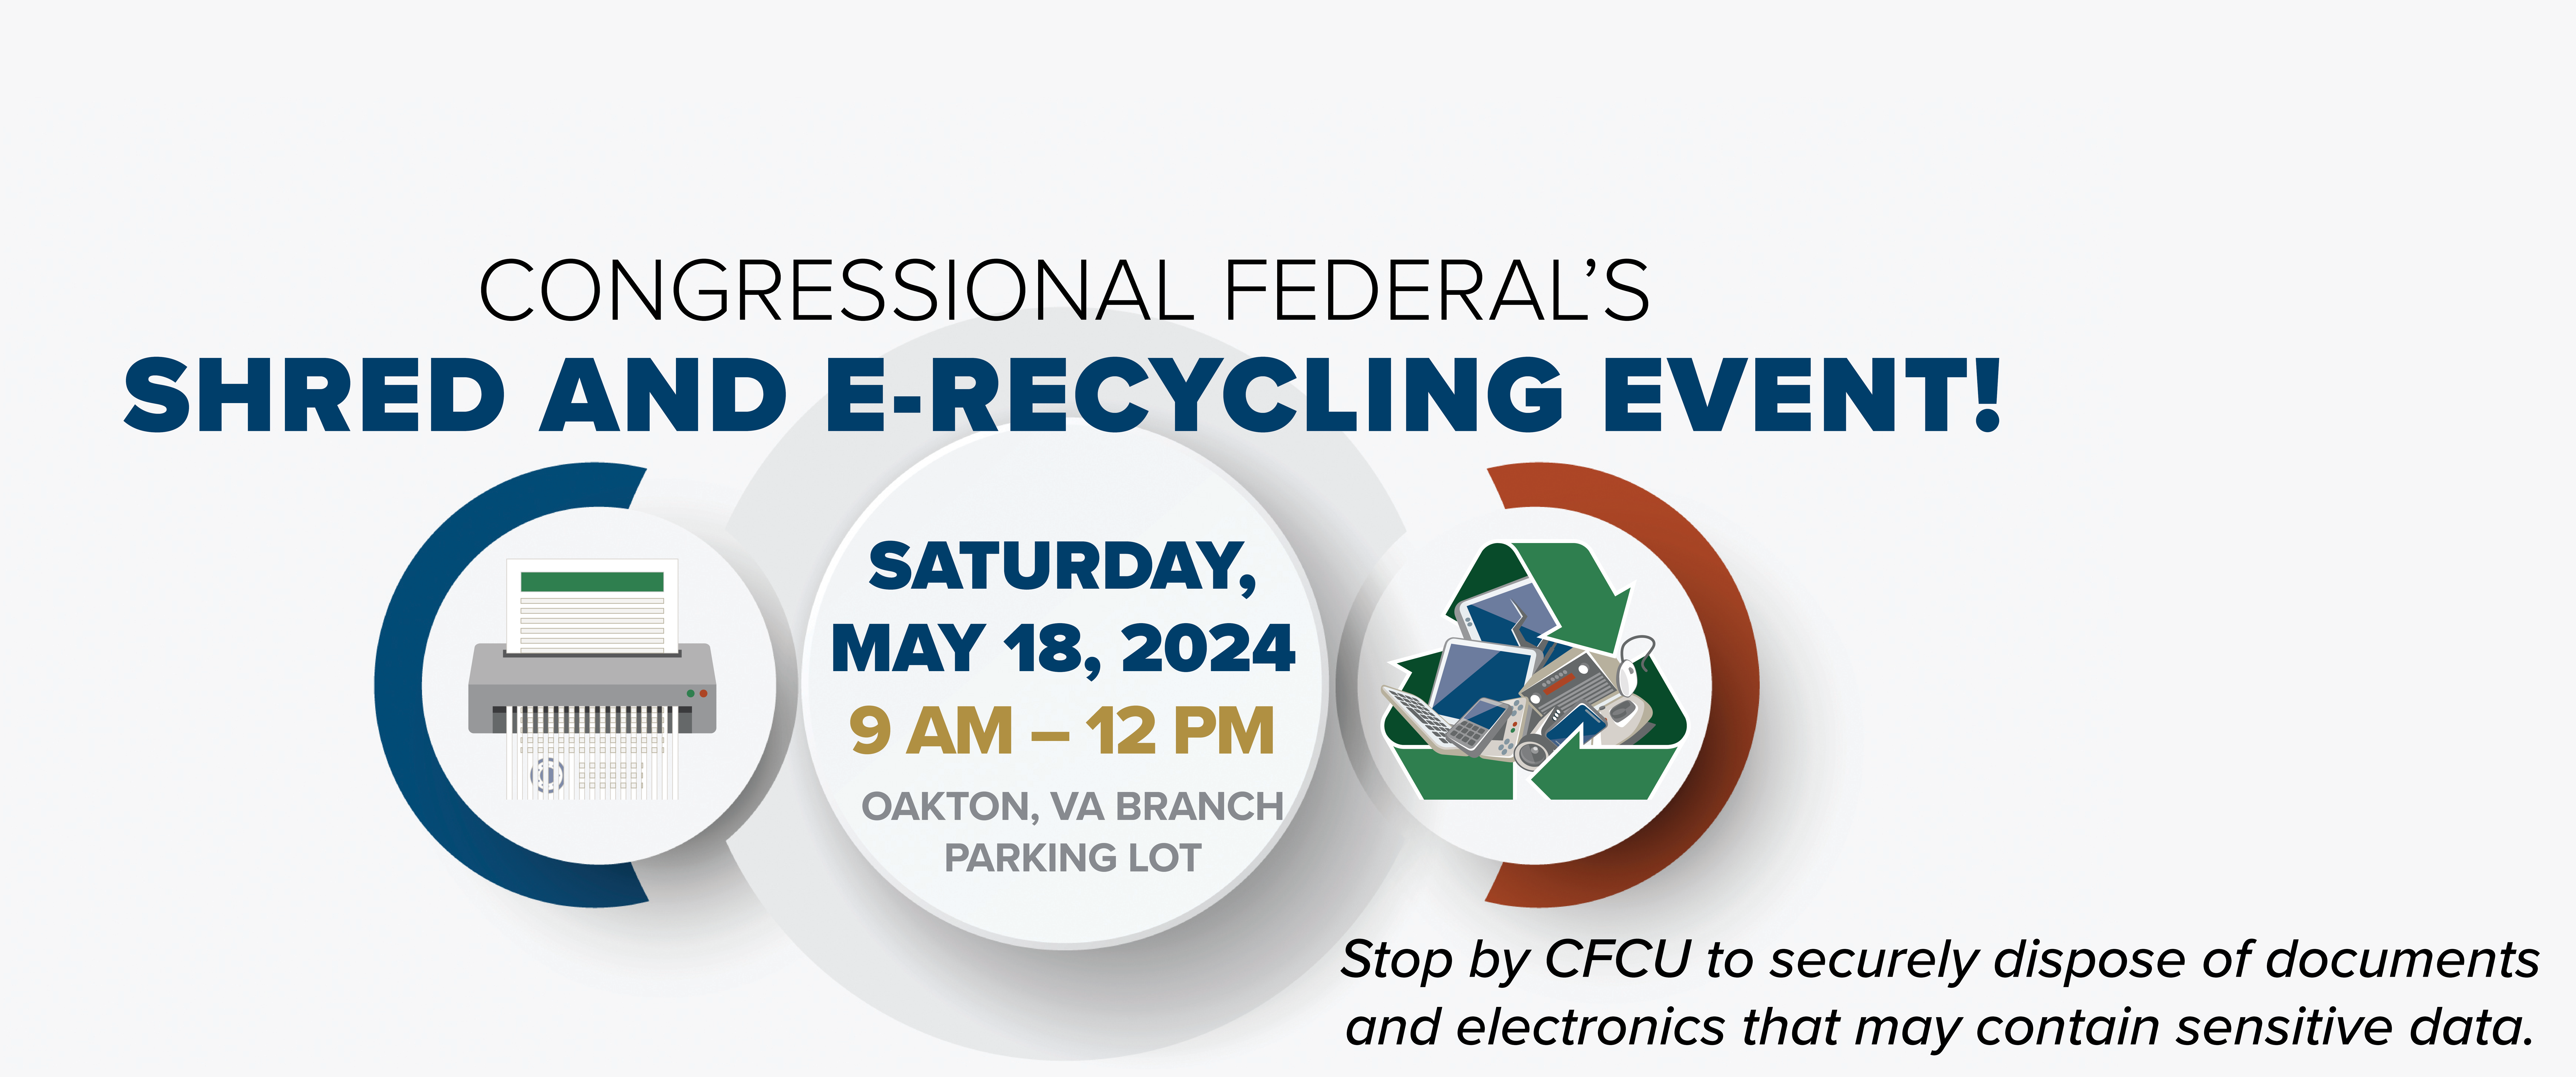 CONGRESSIONAL FEDERAL'S SHRED AND  E-RECYCLING EVENT! SATURDAY, MAY 18, 2024 9 AM - 12 PM OAKTON, VA BRANCH PARKING LOT Stop by CFCU to securely dispose of documents and electronics that may contain sensitive data. Learn more